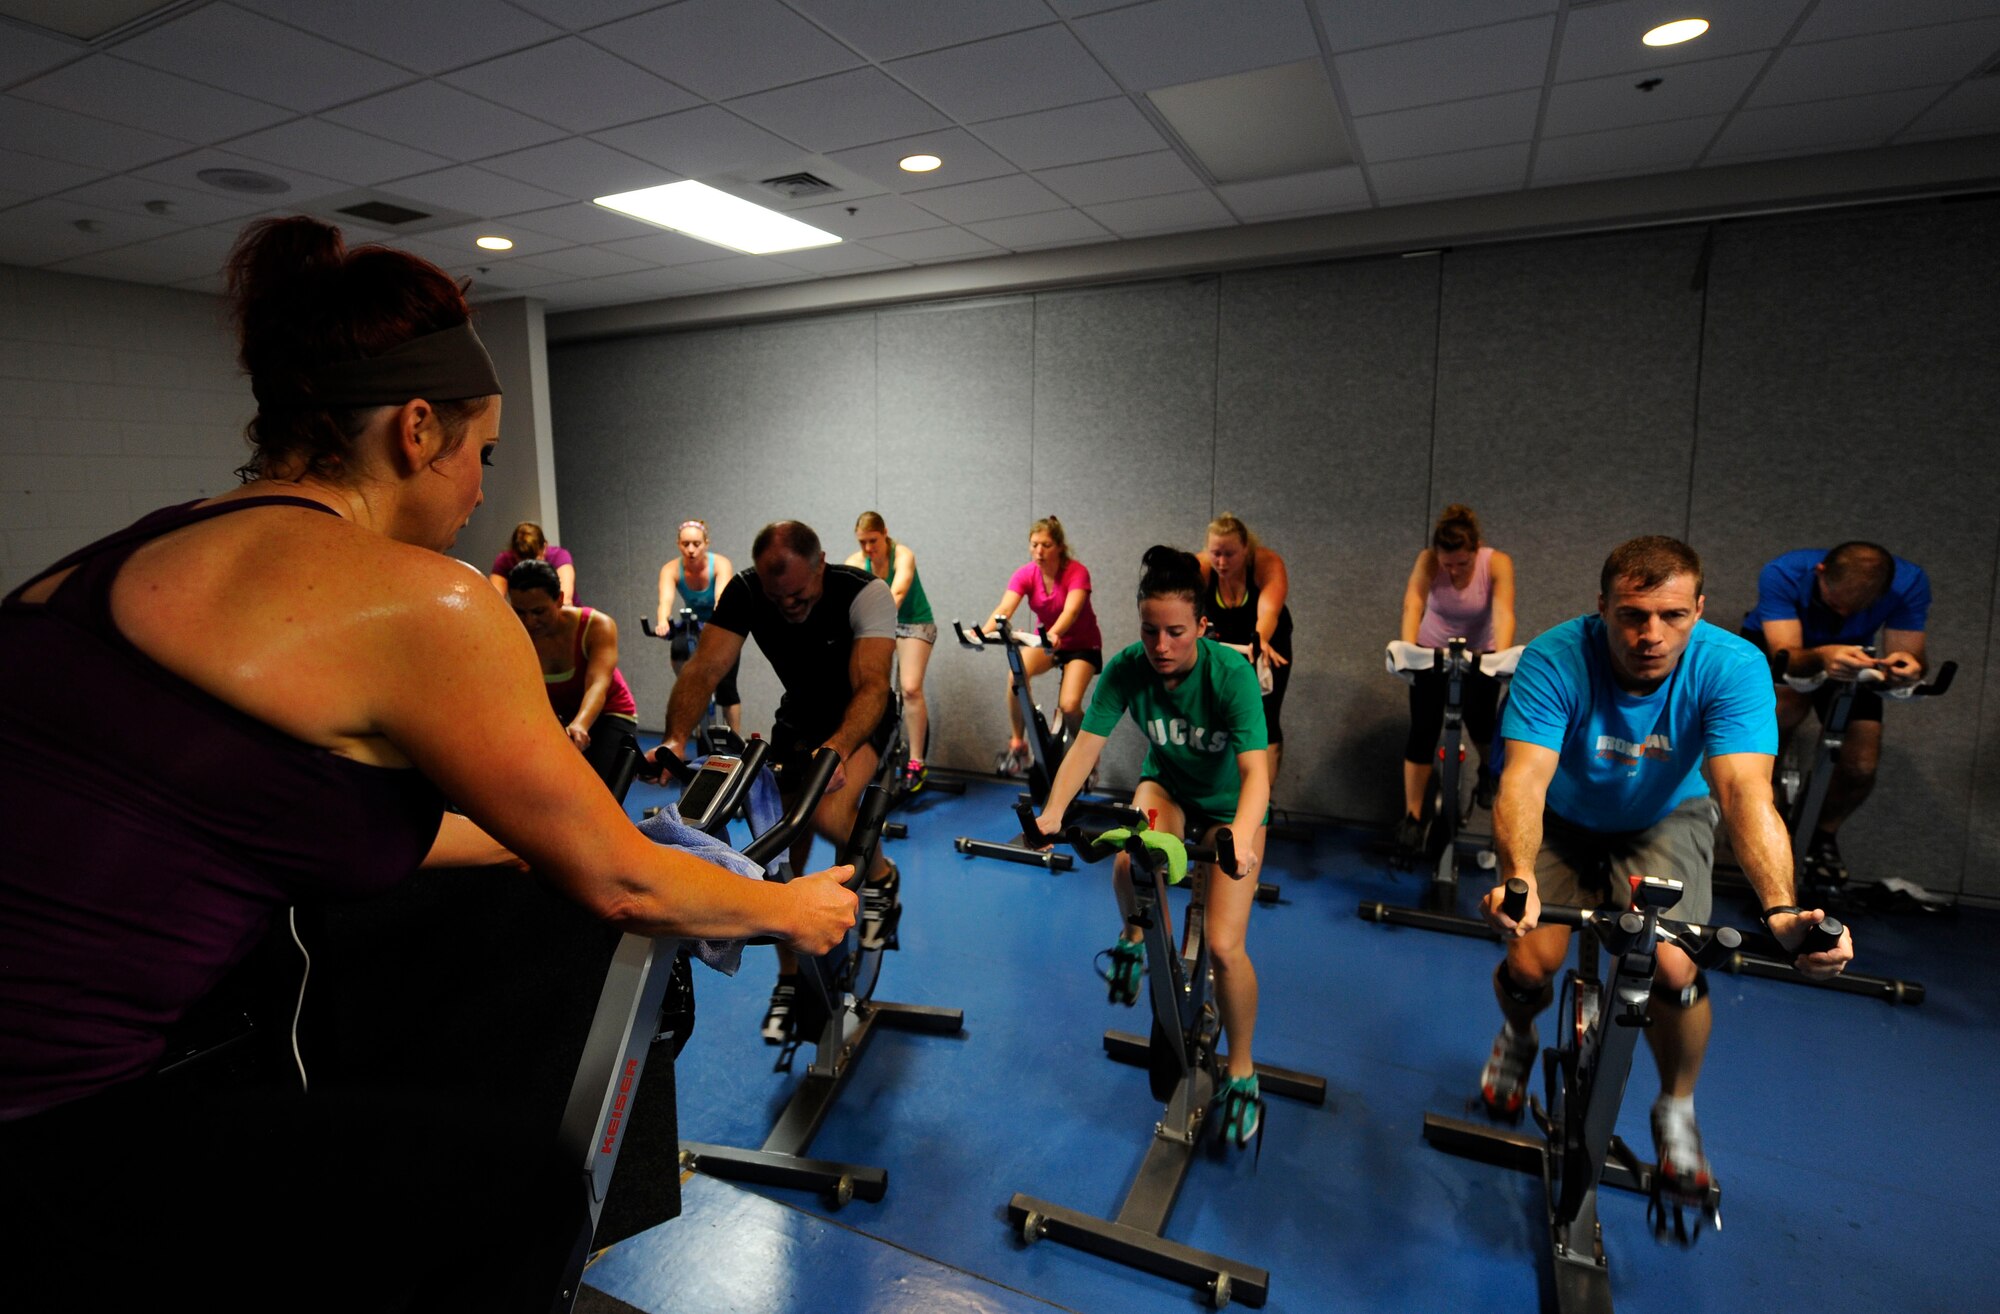 Lisa Pizzo, lead group fitness instructor, instructs her class during a cycle workout at Hurlburt Field, Fla., Feb. 20, 2014. Pizzo said she has taught at the Aderholt Gym since 2005. (U.S. Air Force photo/Airman 1st Class Andrea Posey)